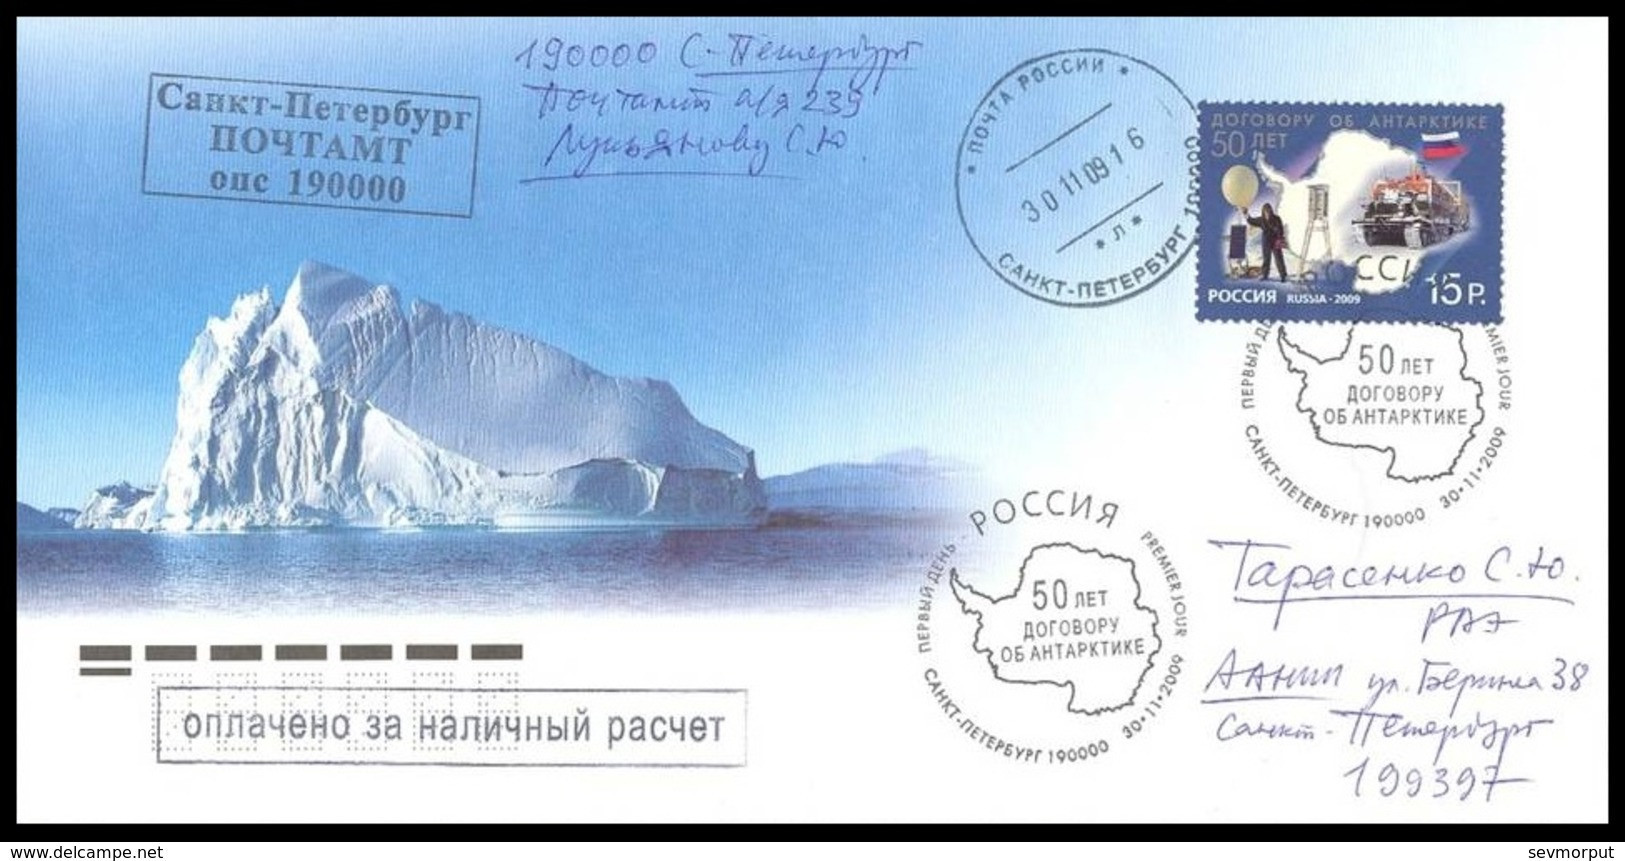 RUSSIA 2009 COVER Used FDC 1608 ANTARCTIC TREATY TRACTOR TRACTEUR BALLON FLAG Zond METEO CLIMATE TRANSPORT 1379 Mailed - FDC